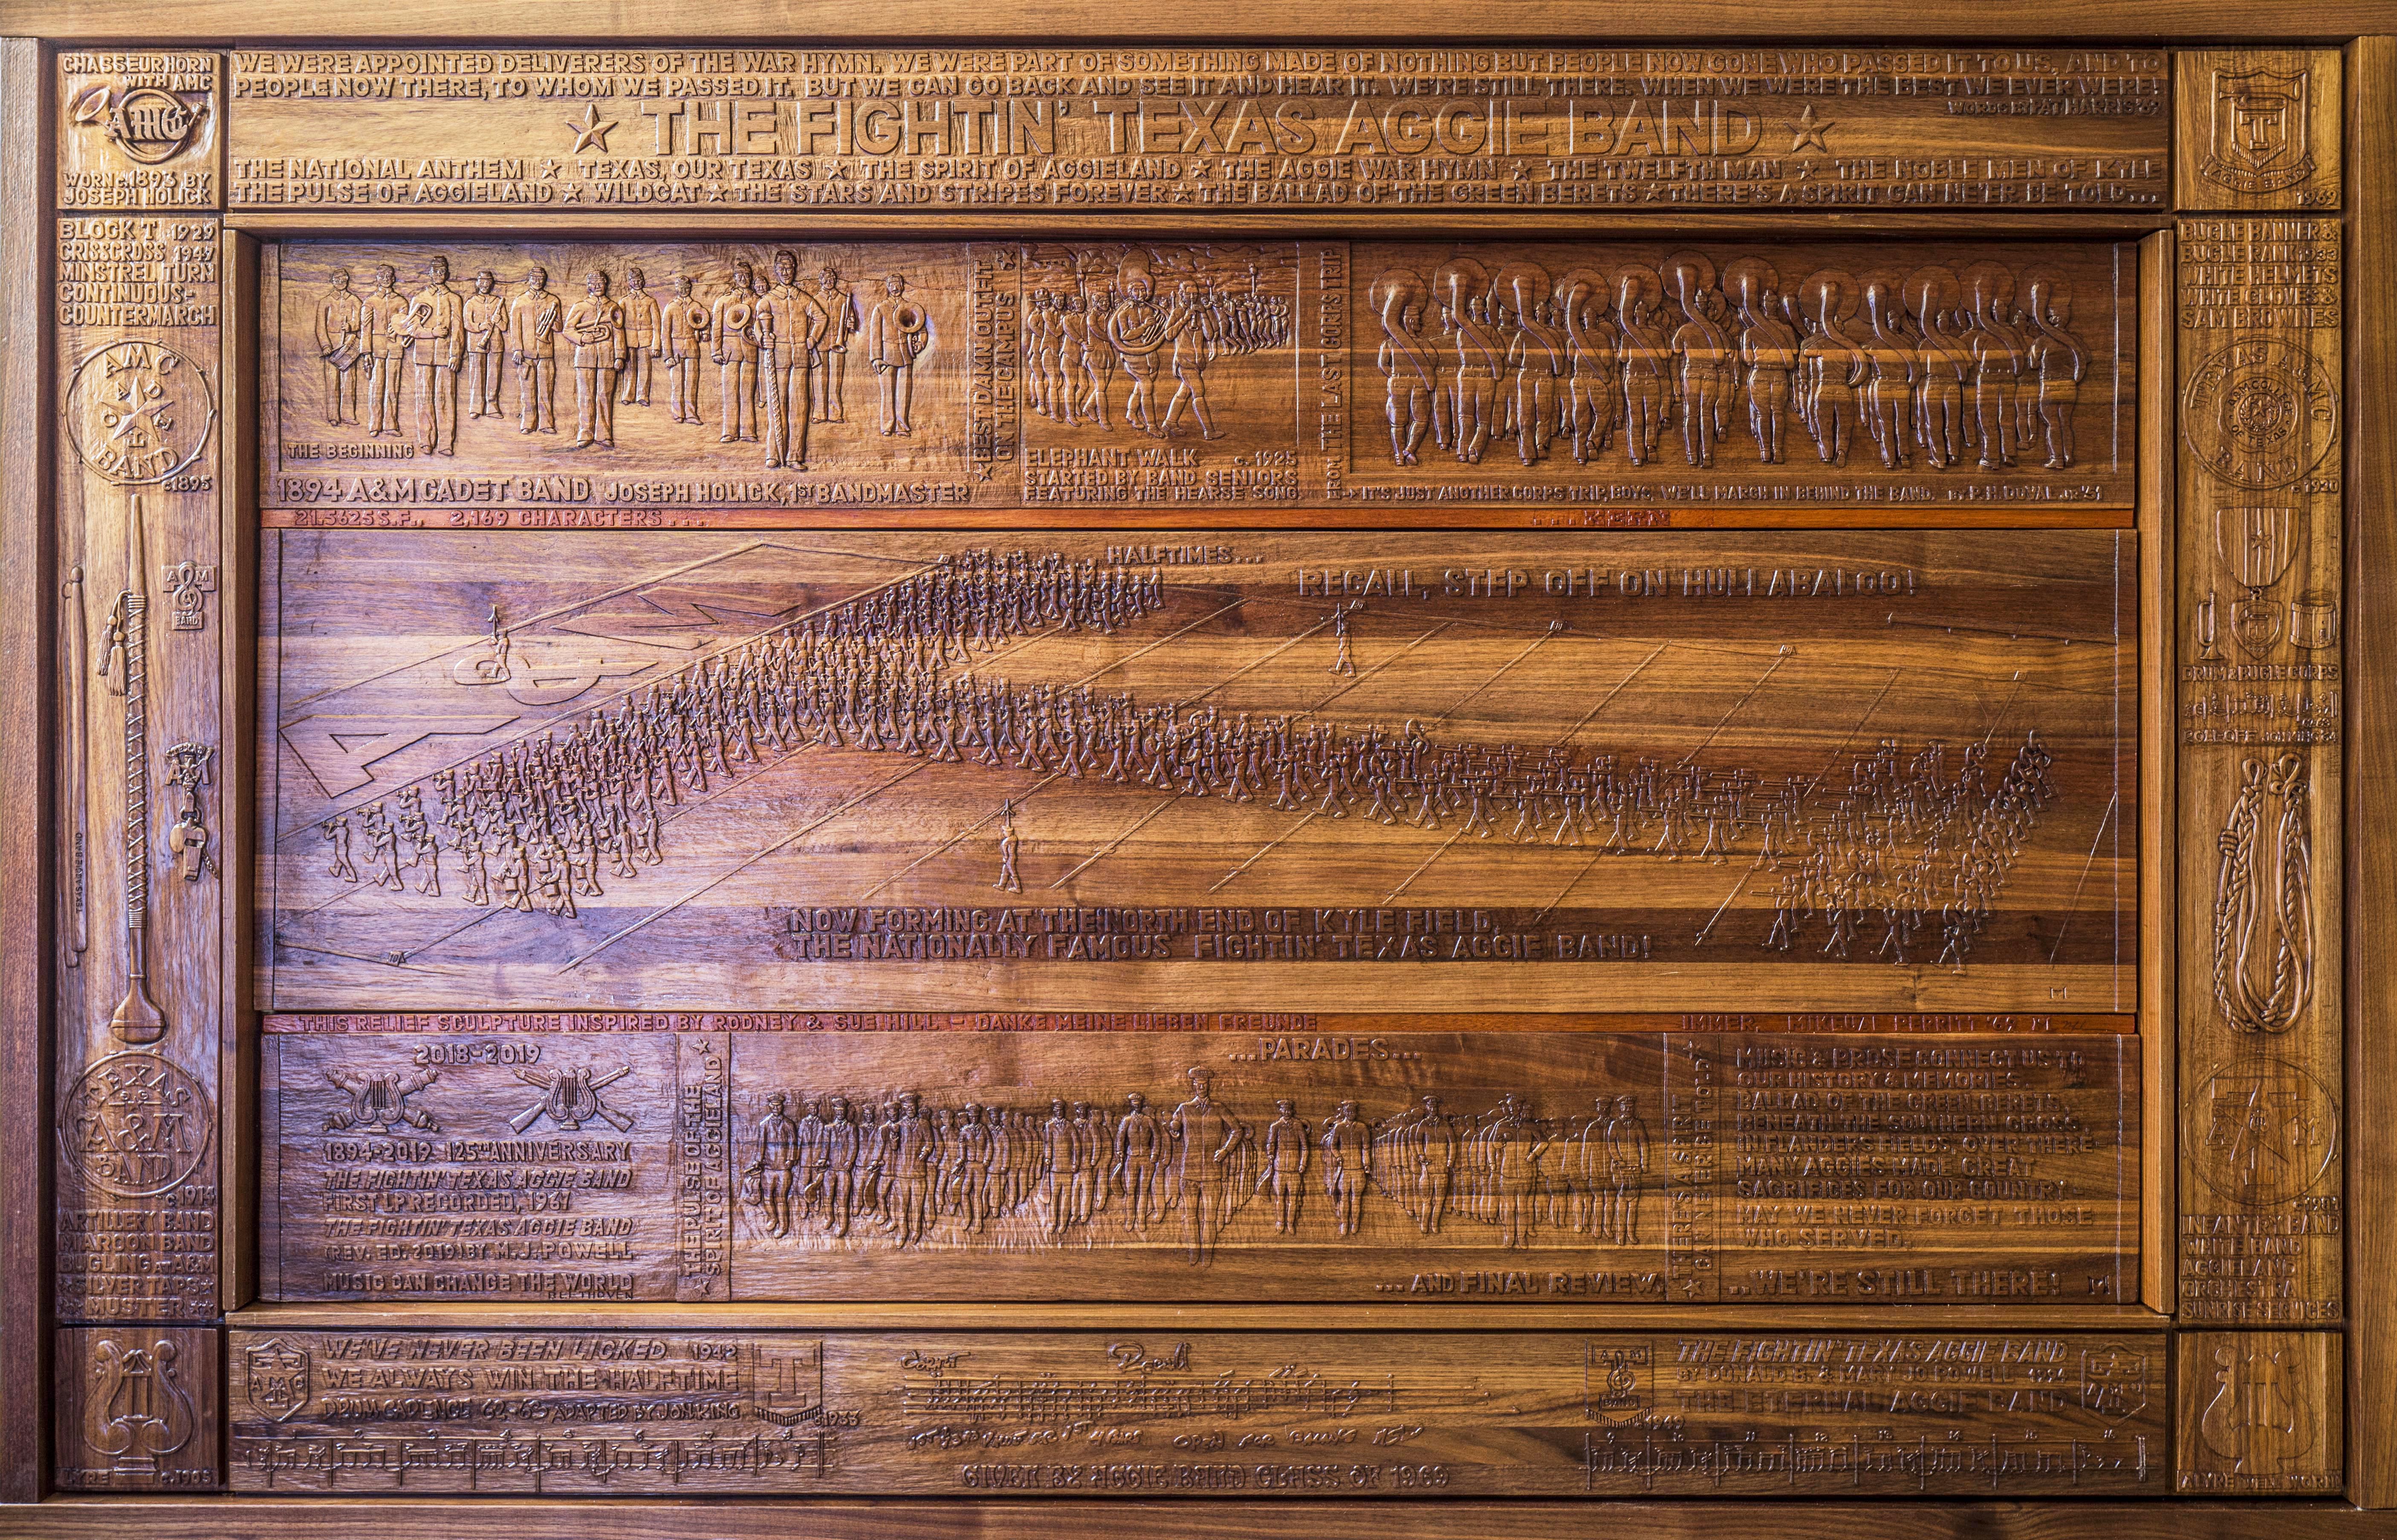 The full walnut and mahogany wood relief sculpture hand created by Mikeual Perritt. 